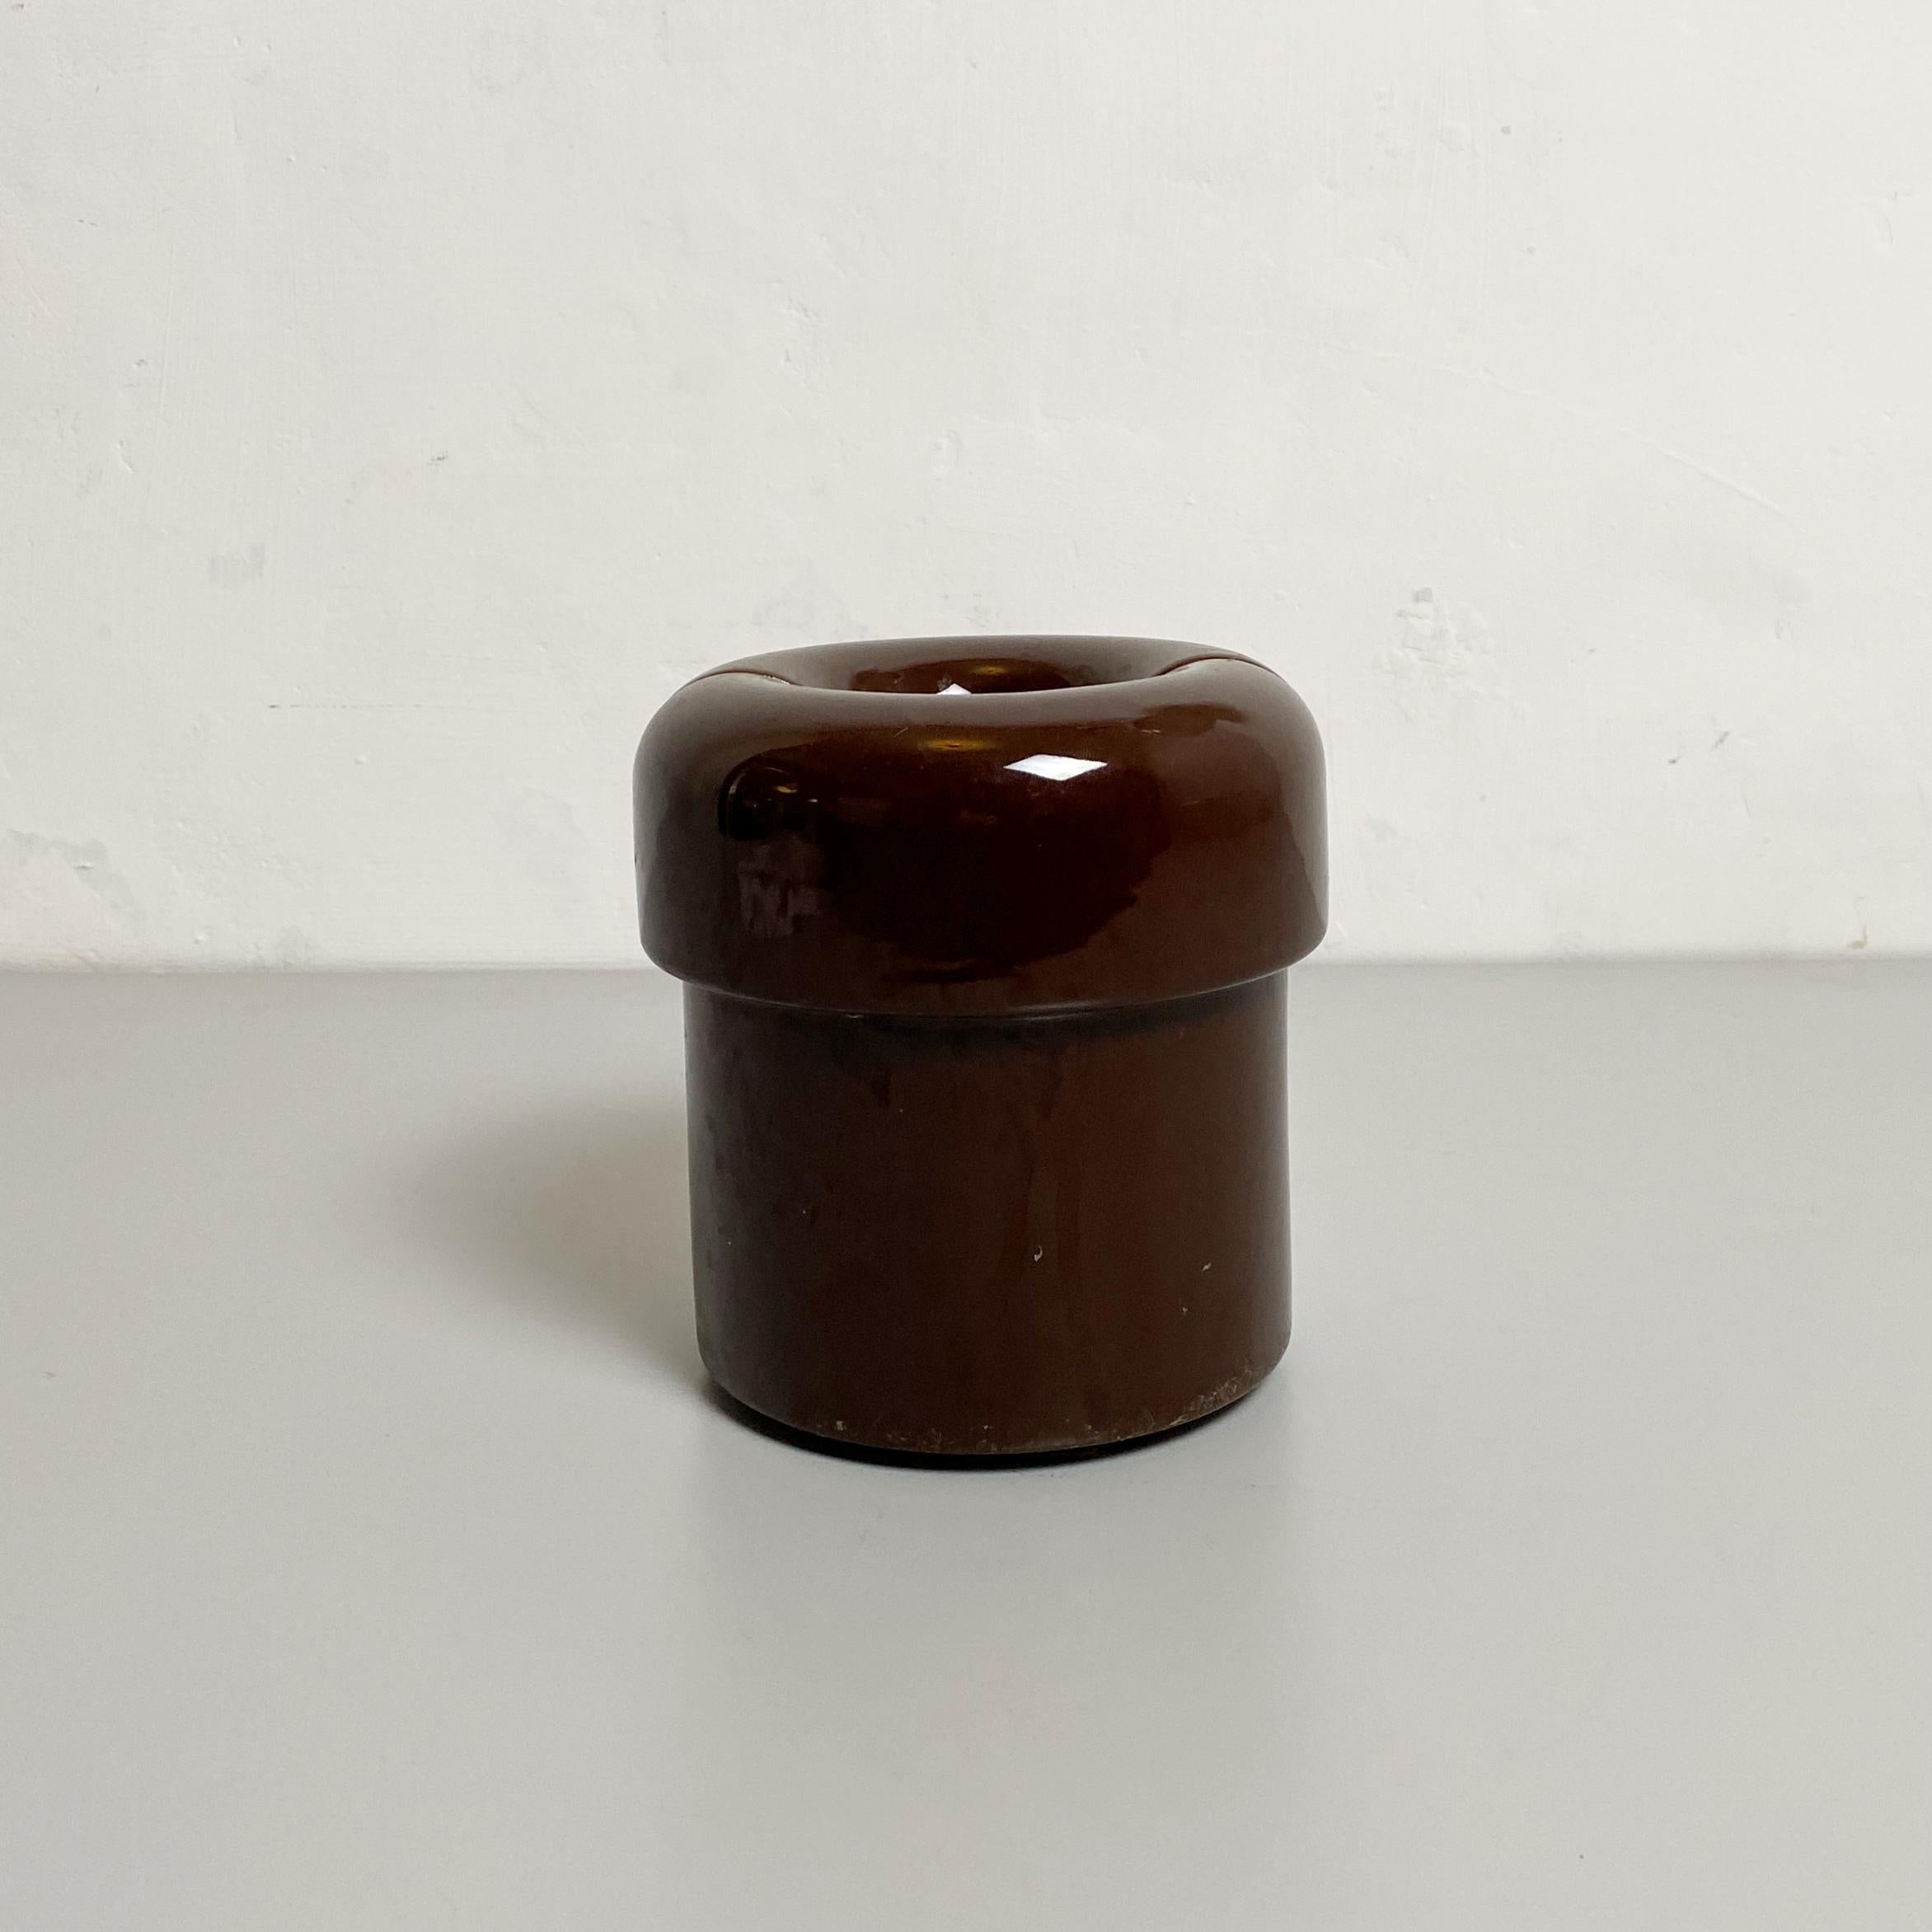 Brown ceramic vase, 1960s
Irregular shaped vase in brown glazed ceramic with glossy finish.
Lineareorm branded, made in Italy.
Fantastic color and design are principal features of this beautiful and decorative vase.
Space age shape
1960s

Good